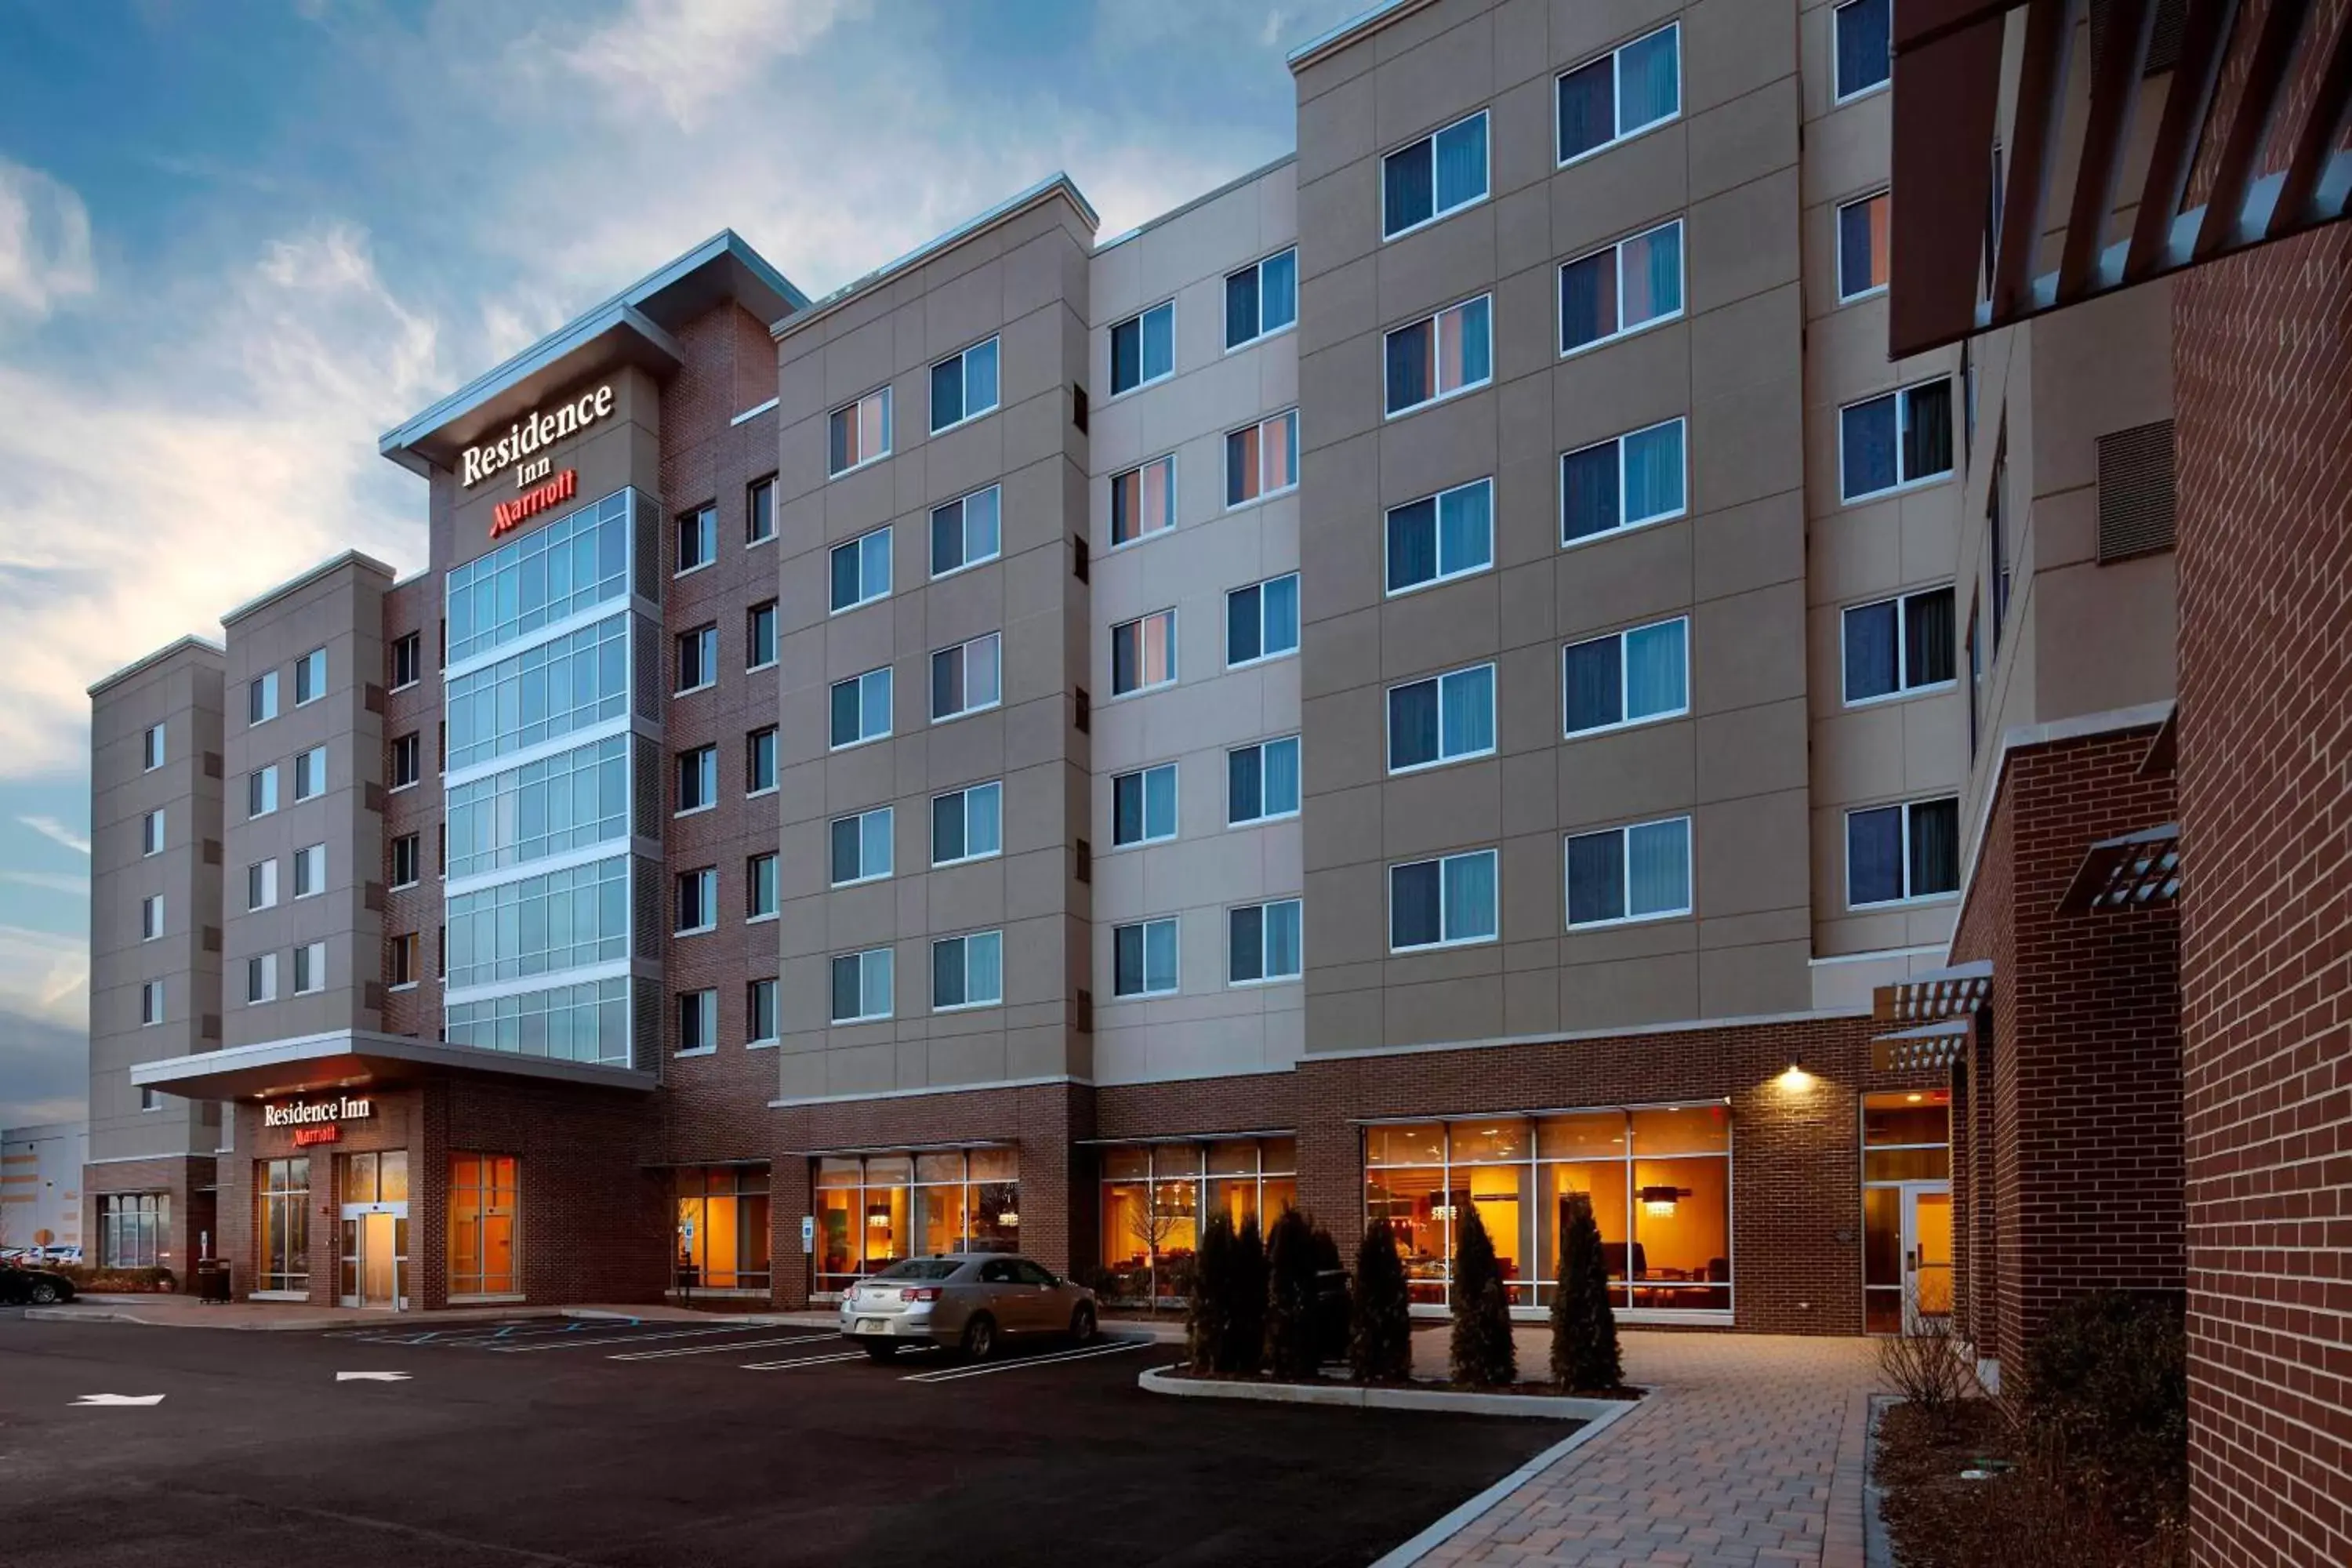 Property Building in Residence Inn by Marriott Secaucus Meadowlands